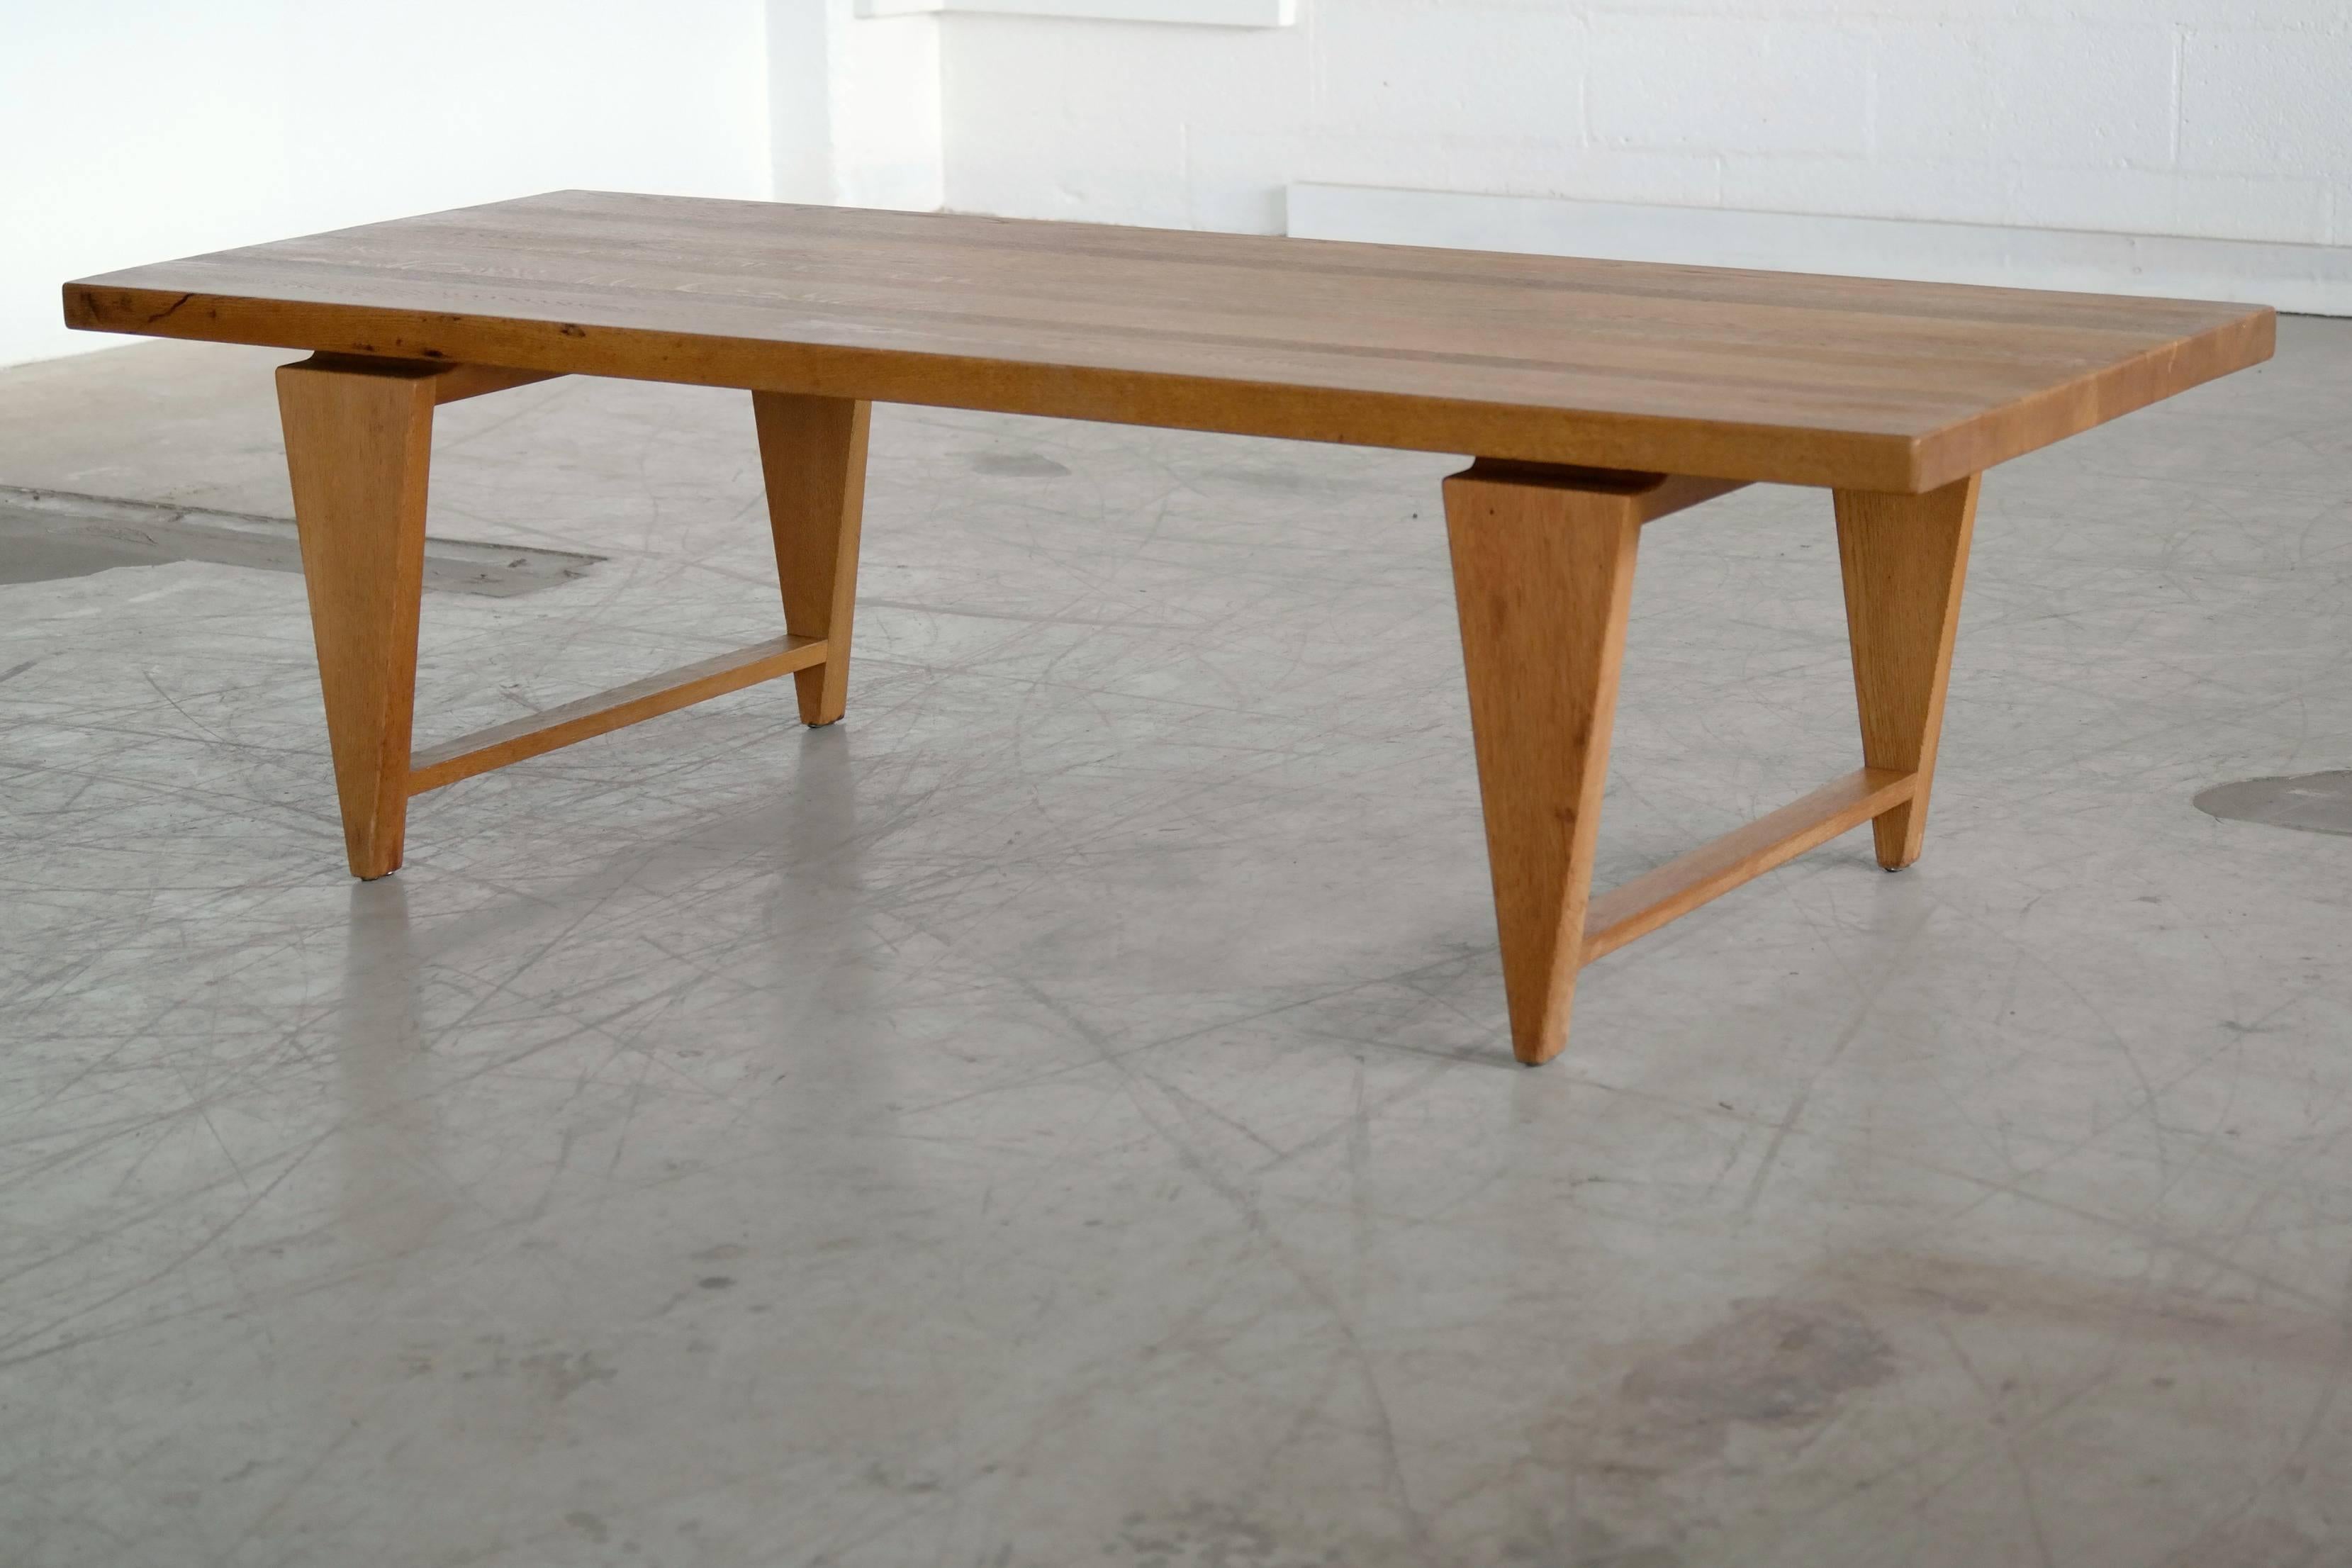 Coffee table by Illum Wikkelsø with distinctive triangular legs and floating top. In solid golden oak, this table has a strong, graceful presence with it's rather solid upper resting almost tip-toeing on it's four points.